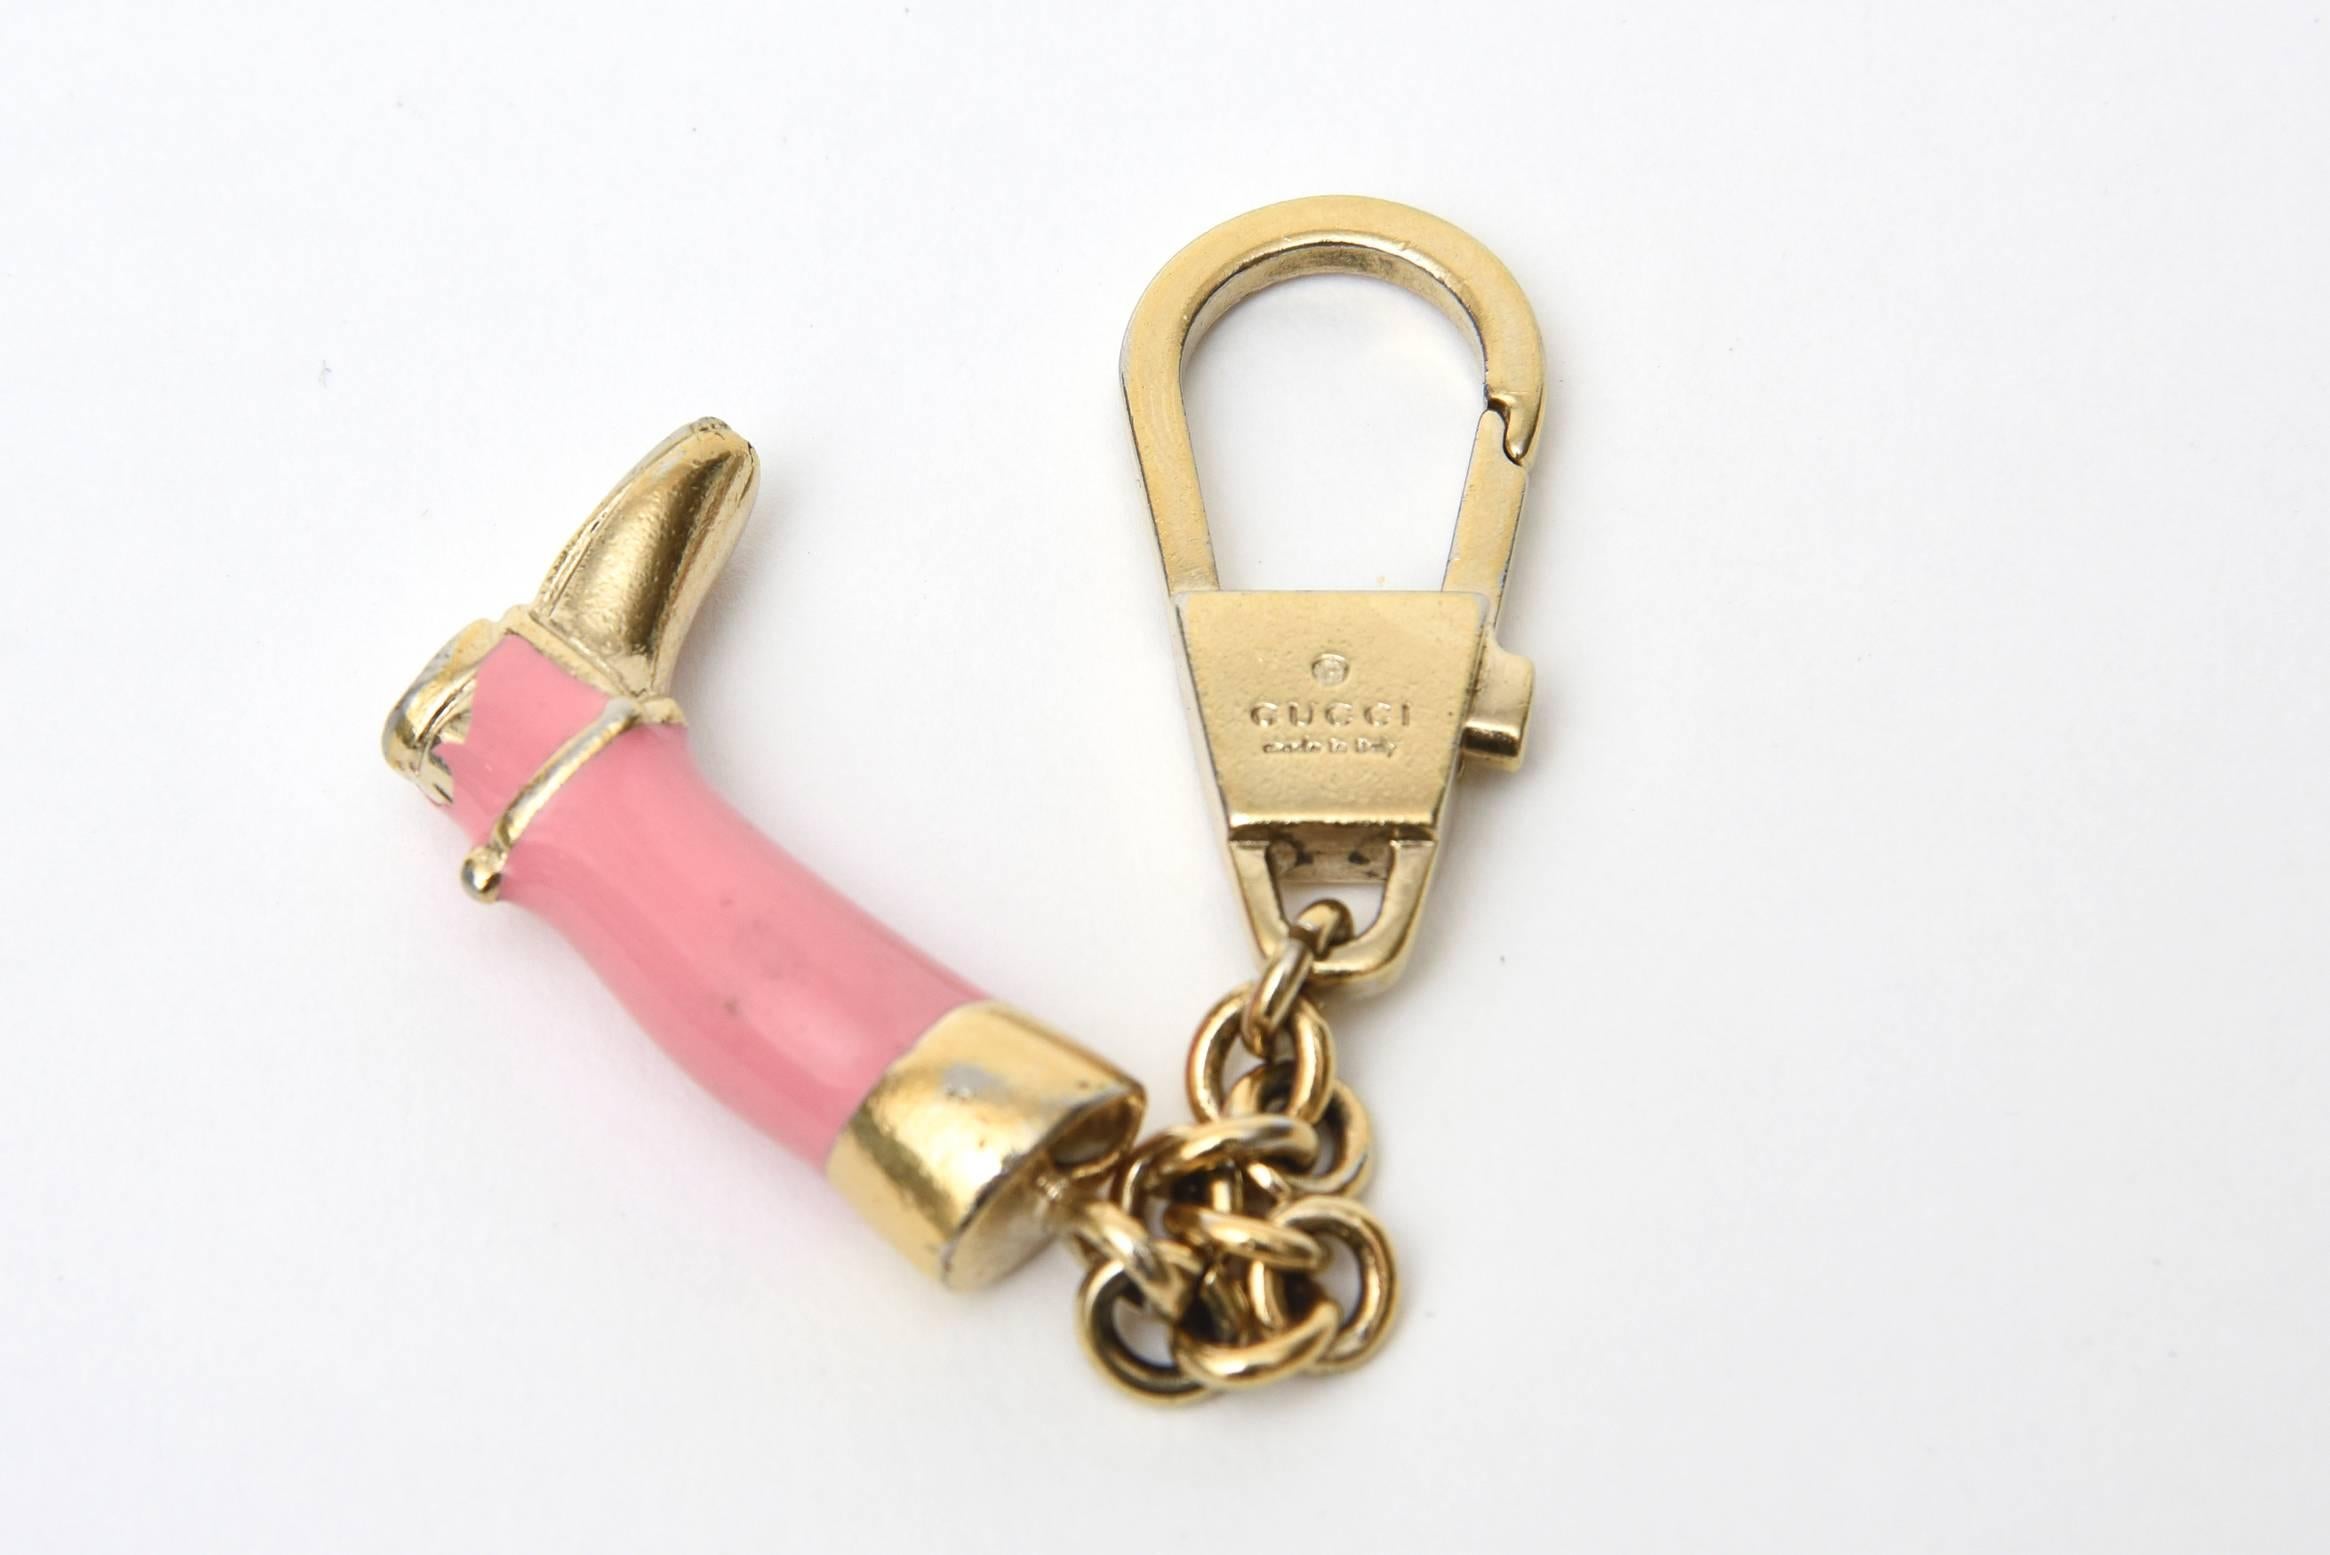  Gucci Signed Vintage Pink Enamel and Brass Plate Stirrup Boot Key Chain  For Sale 1